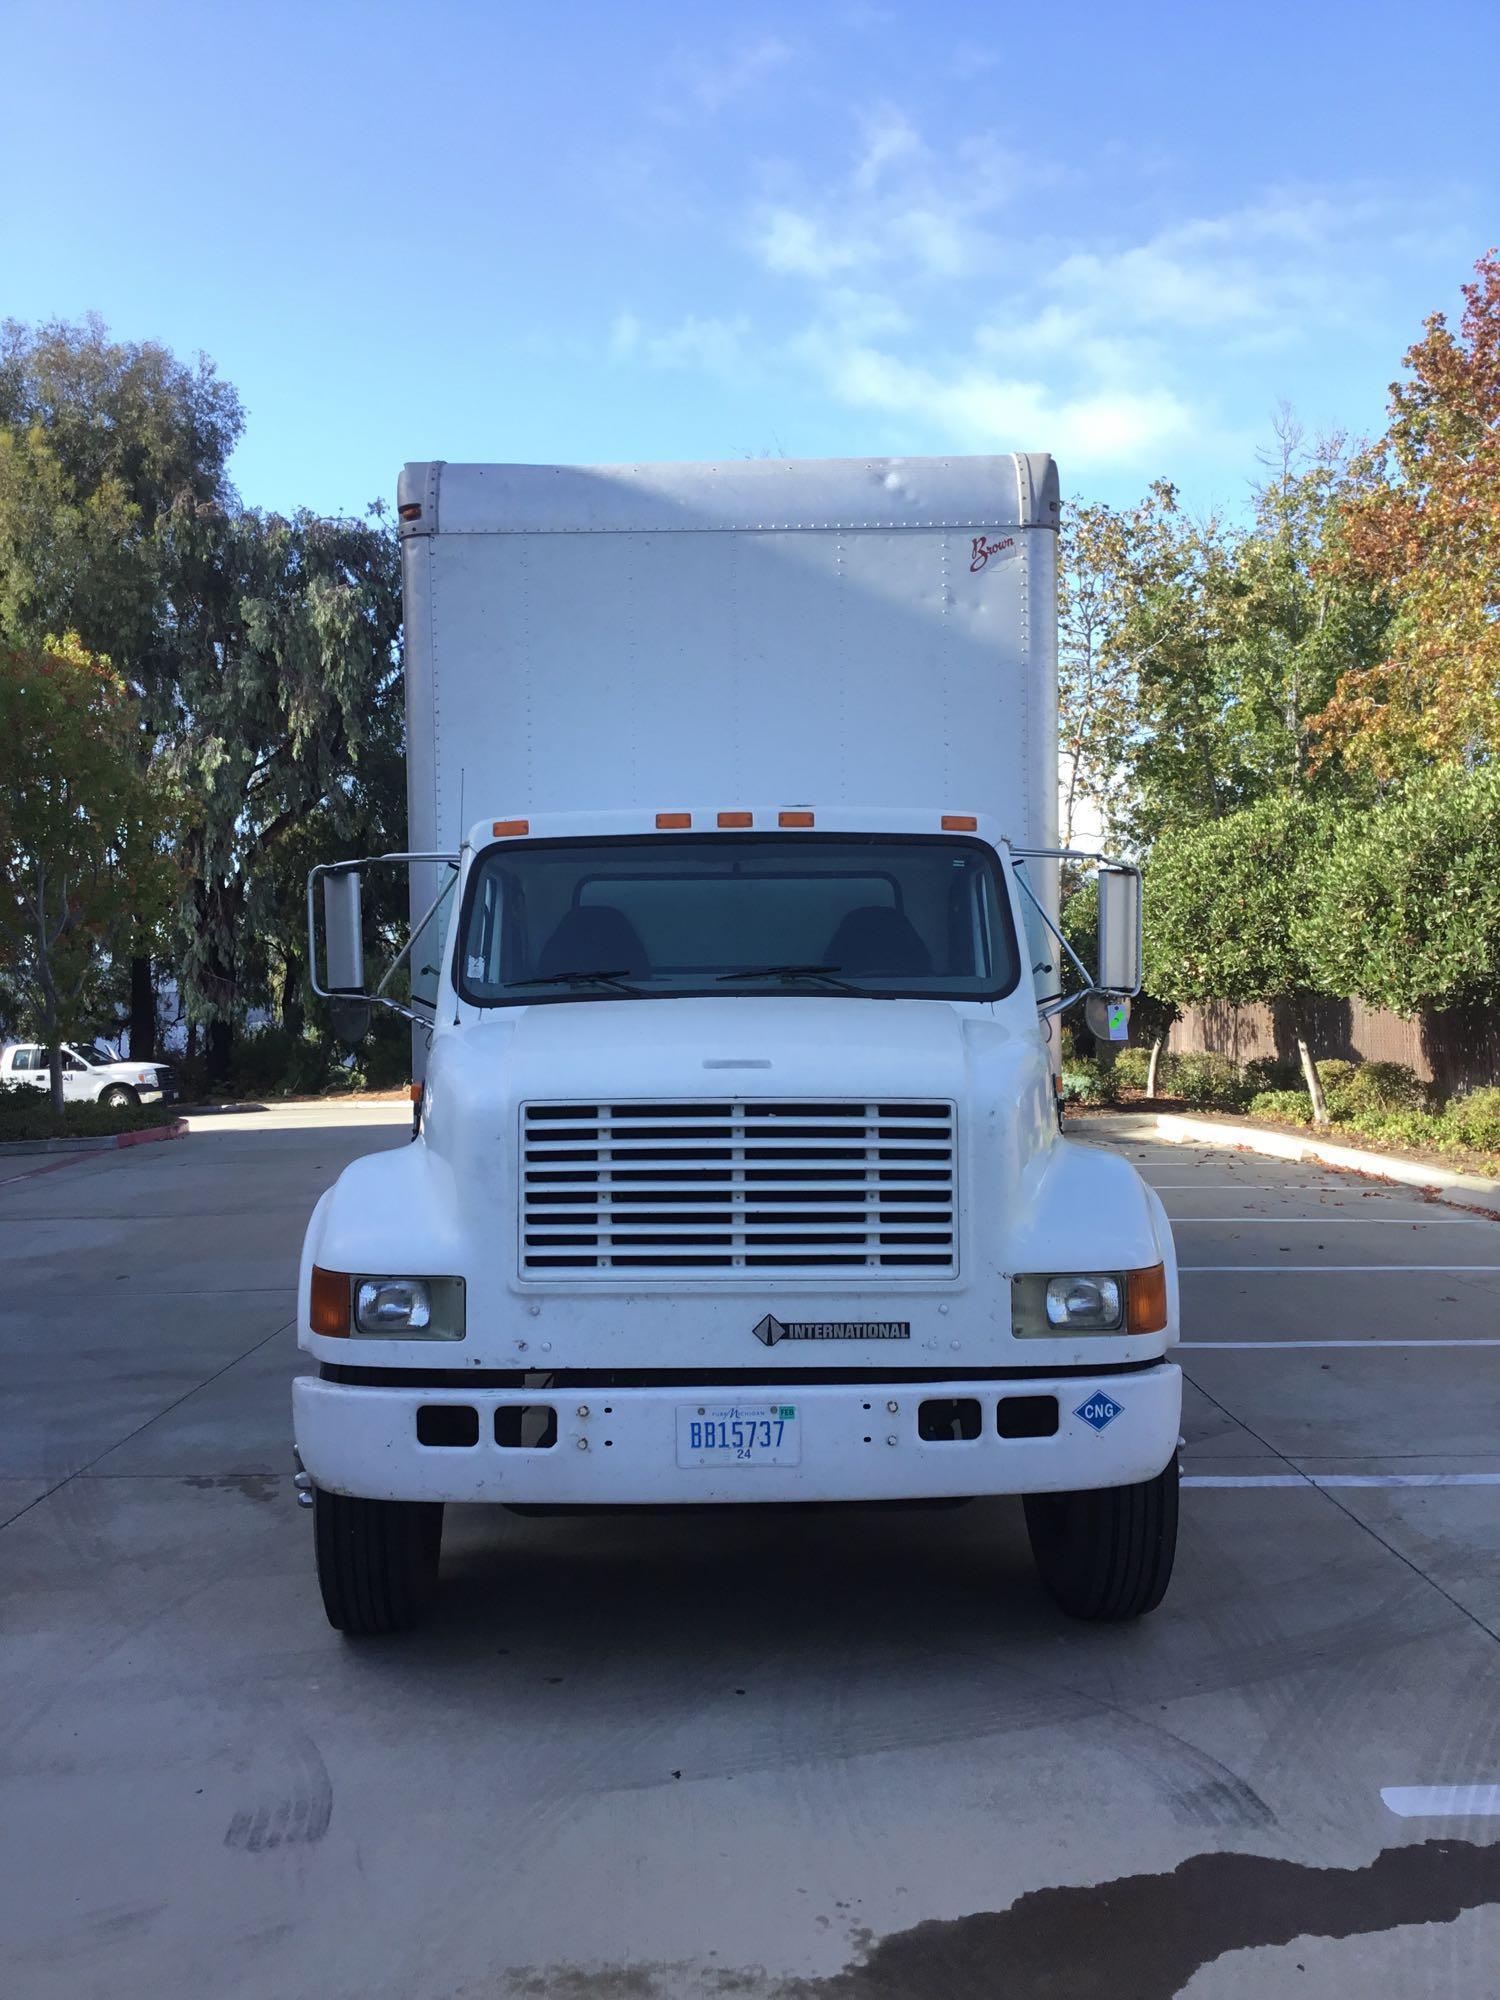 2000 International 4700 CNG 24ft. Box Truck with Lift Gate and Side Access Door